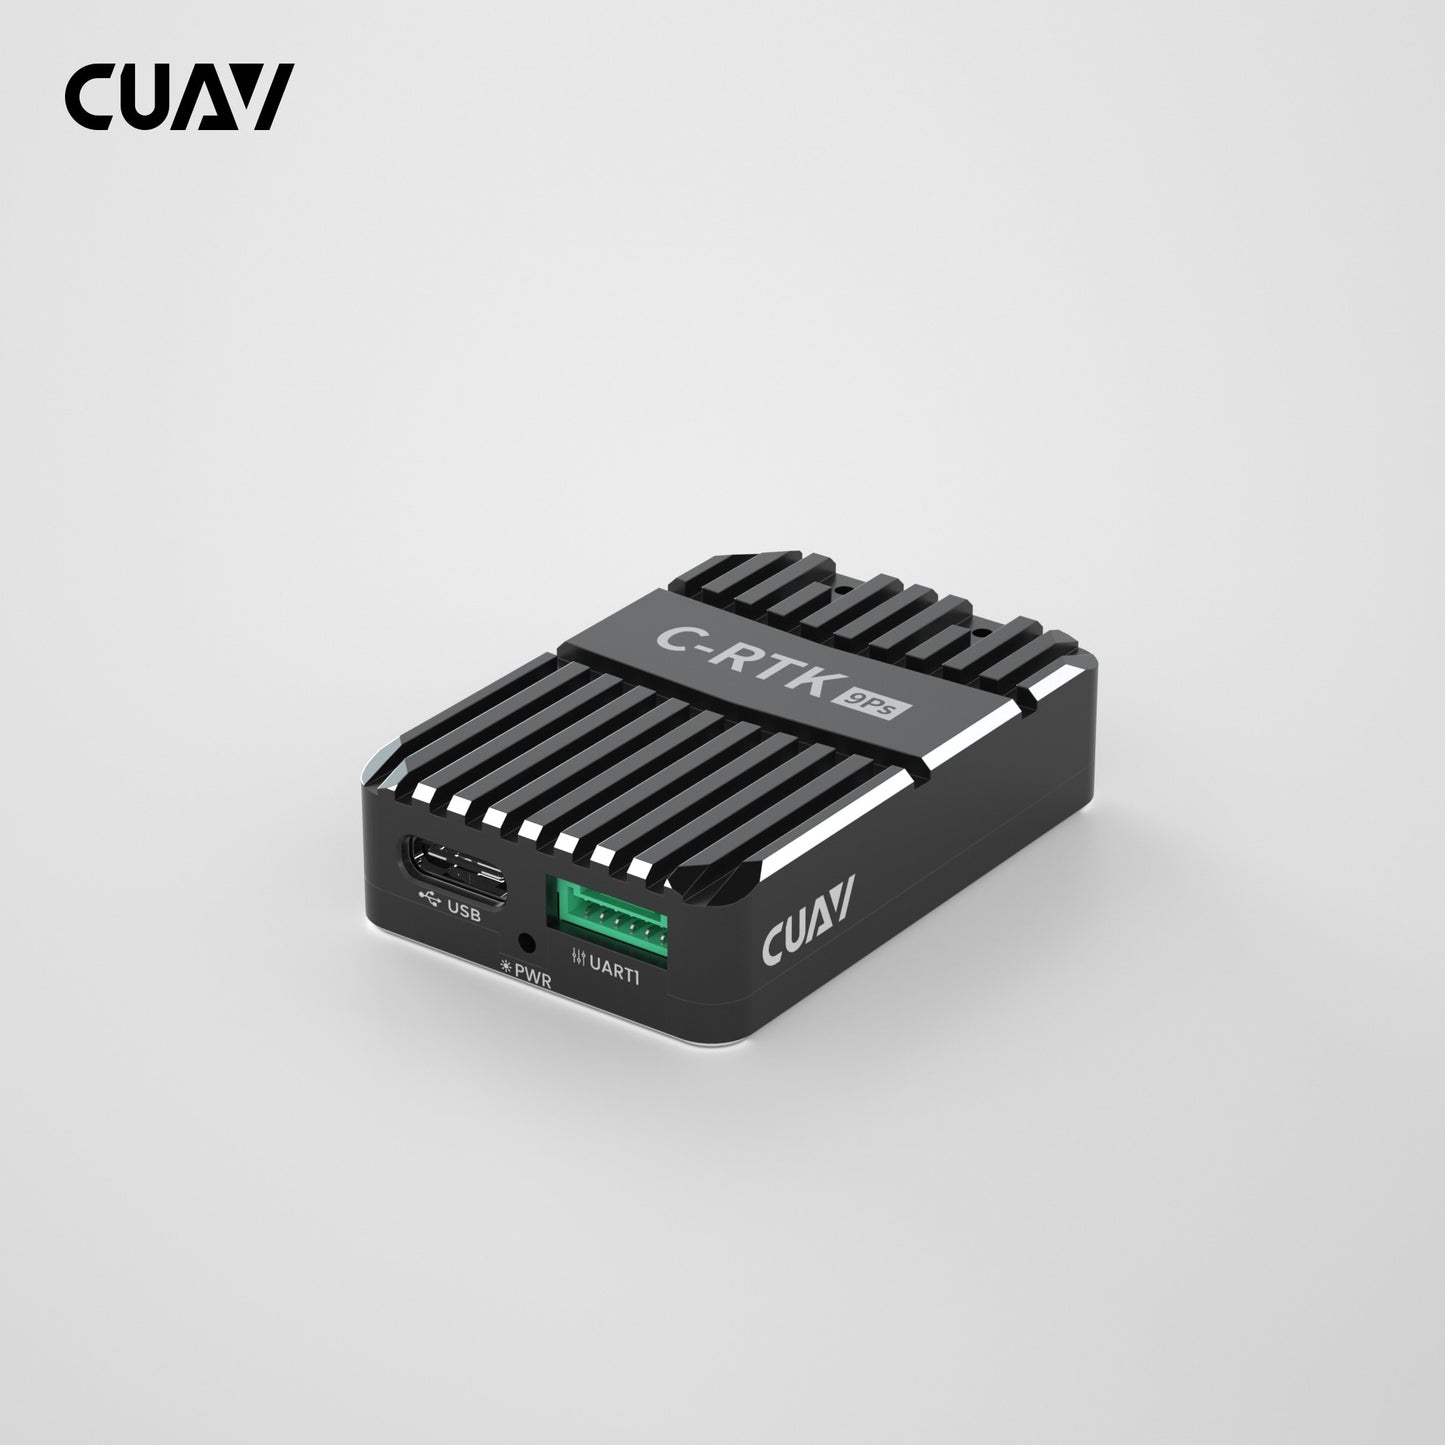 CUAV Dual RTK 9Ps Yaw With V5+ Flight Controller Sky Unit GPS Direction Finding And Positioning Package